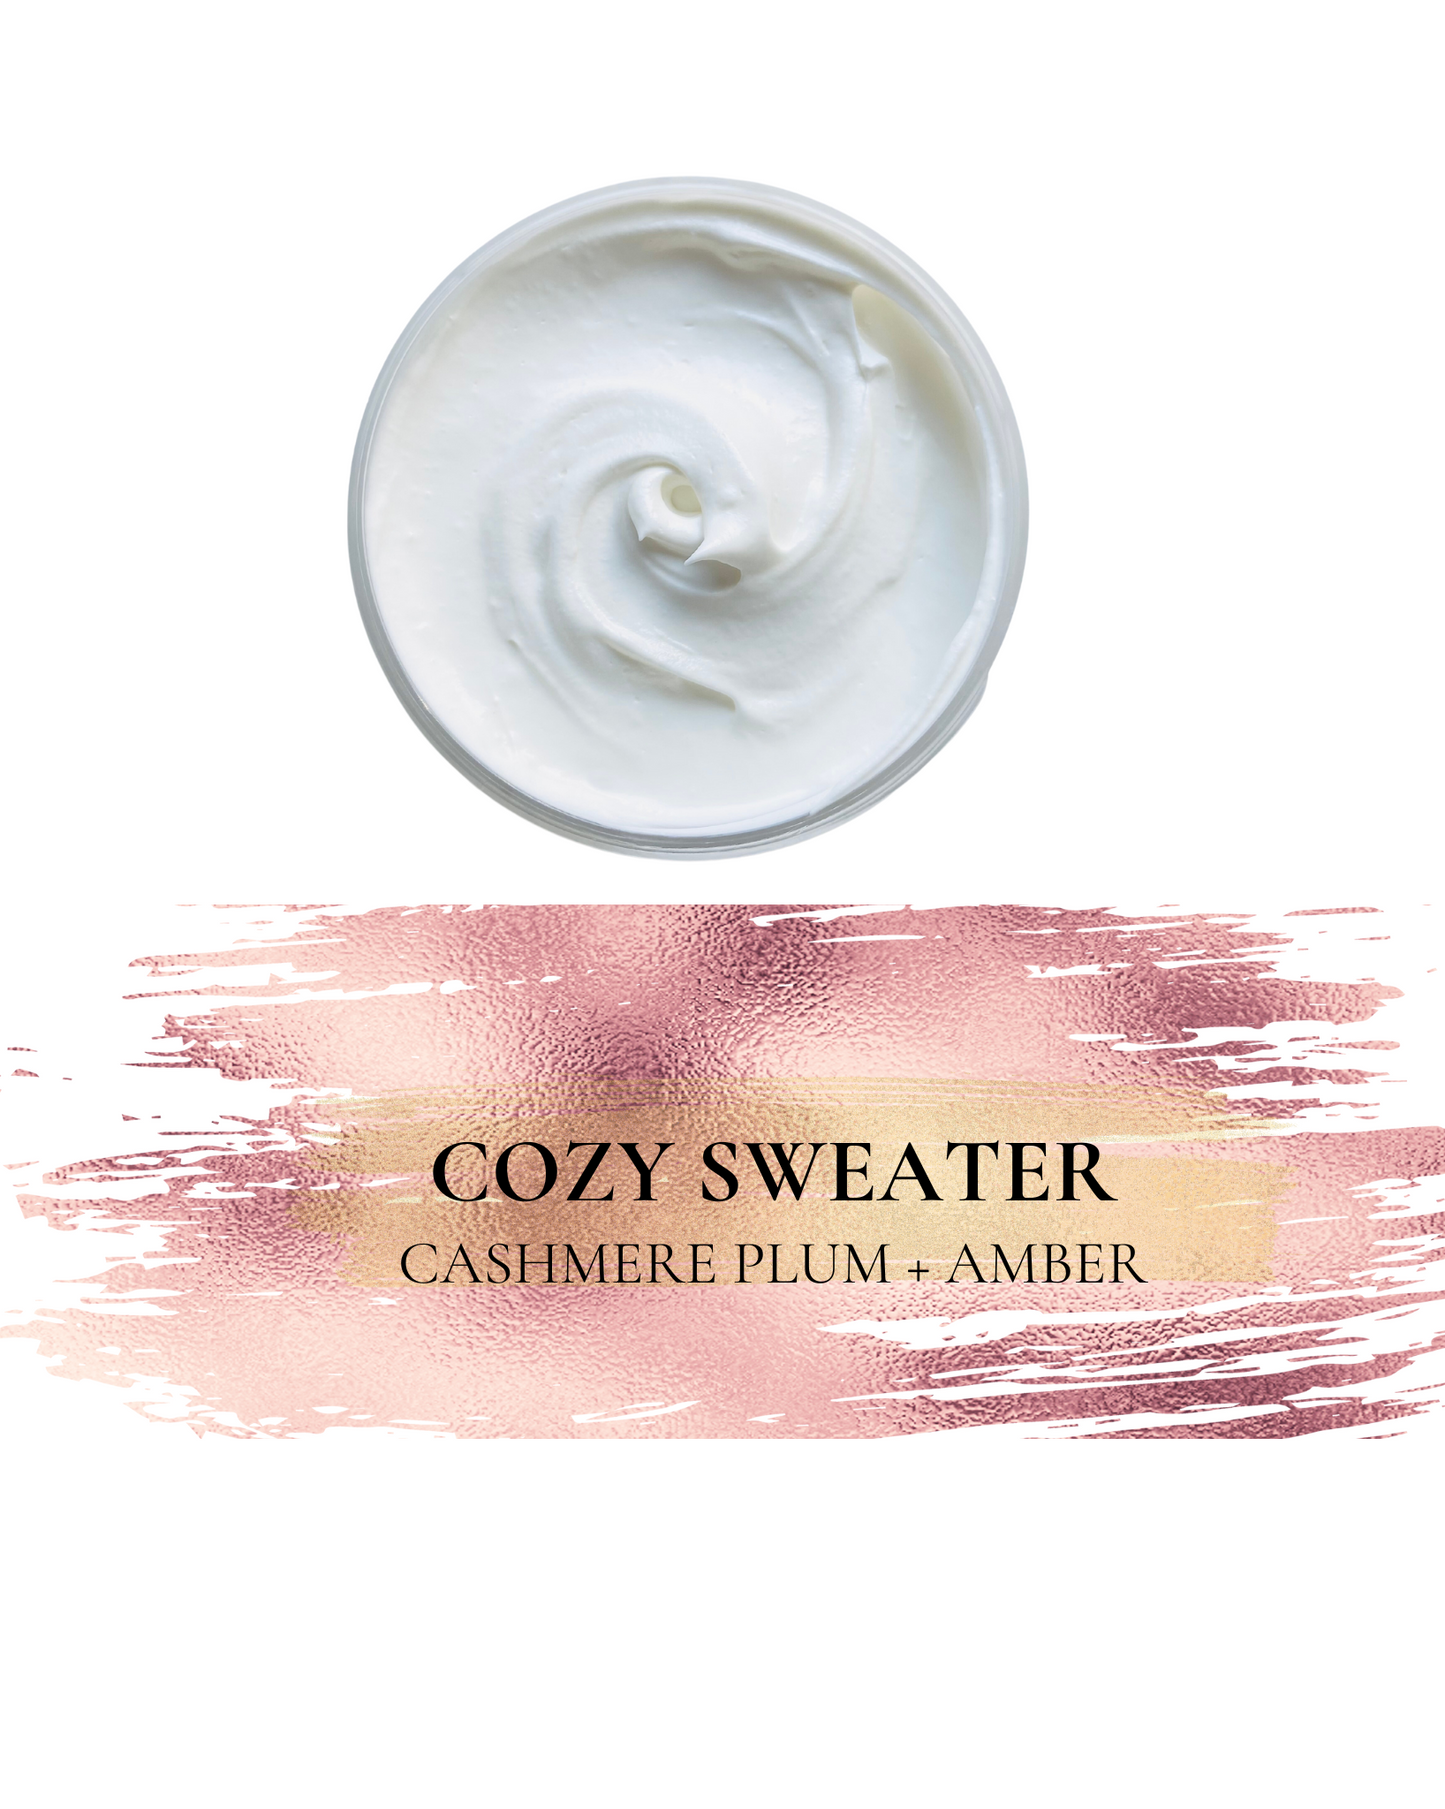 COZY SWEATER WHIPPED SHEA BUTTER